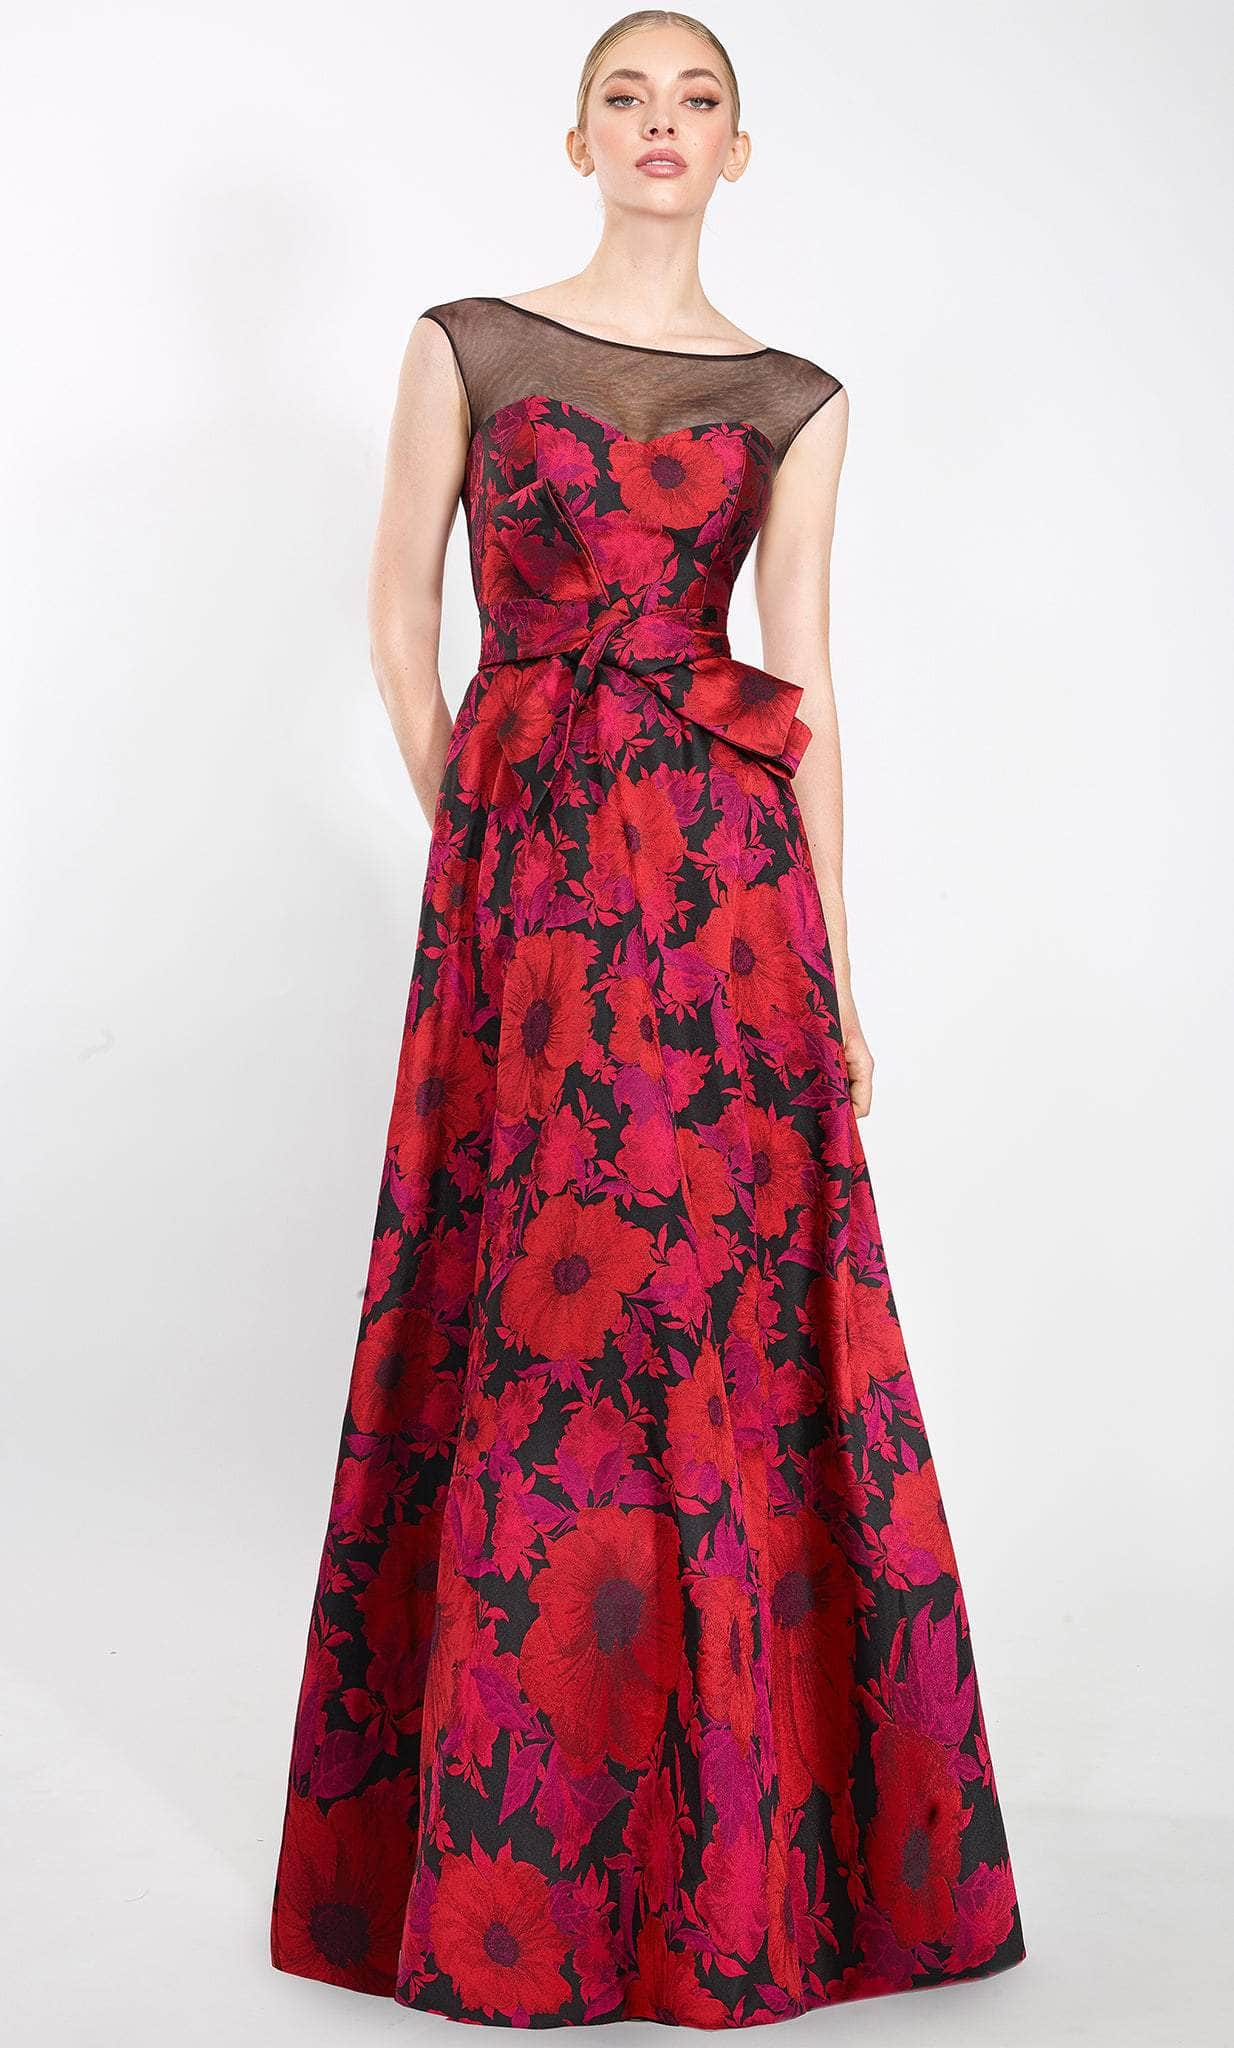 Image of Janique 2206 - Illusion Bateau Printed Evening Gown